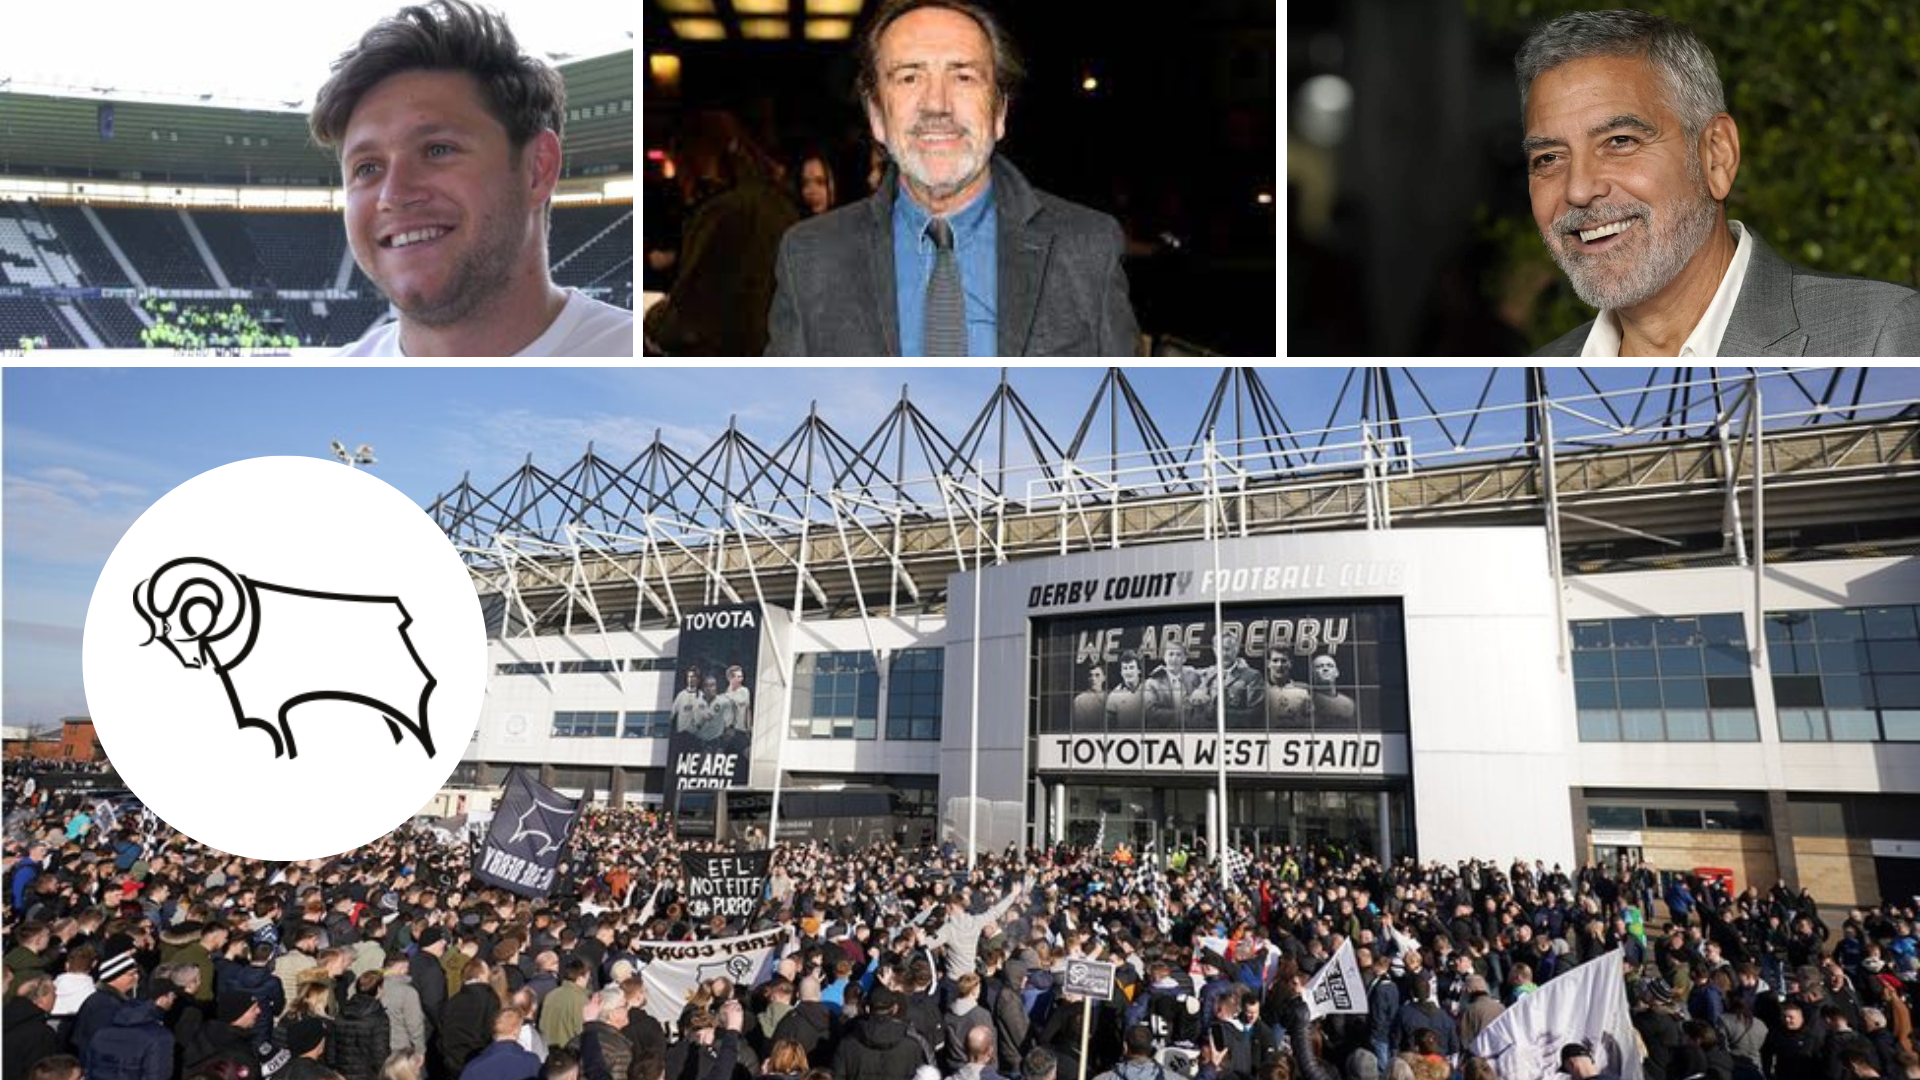 Derby County’s top 6 most famous supporters